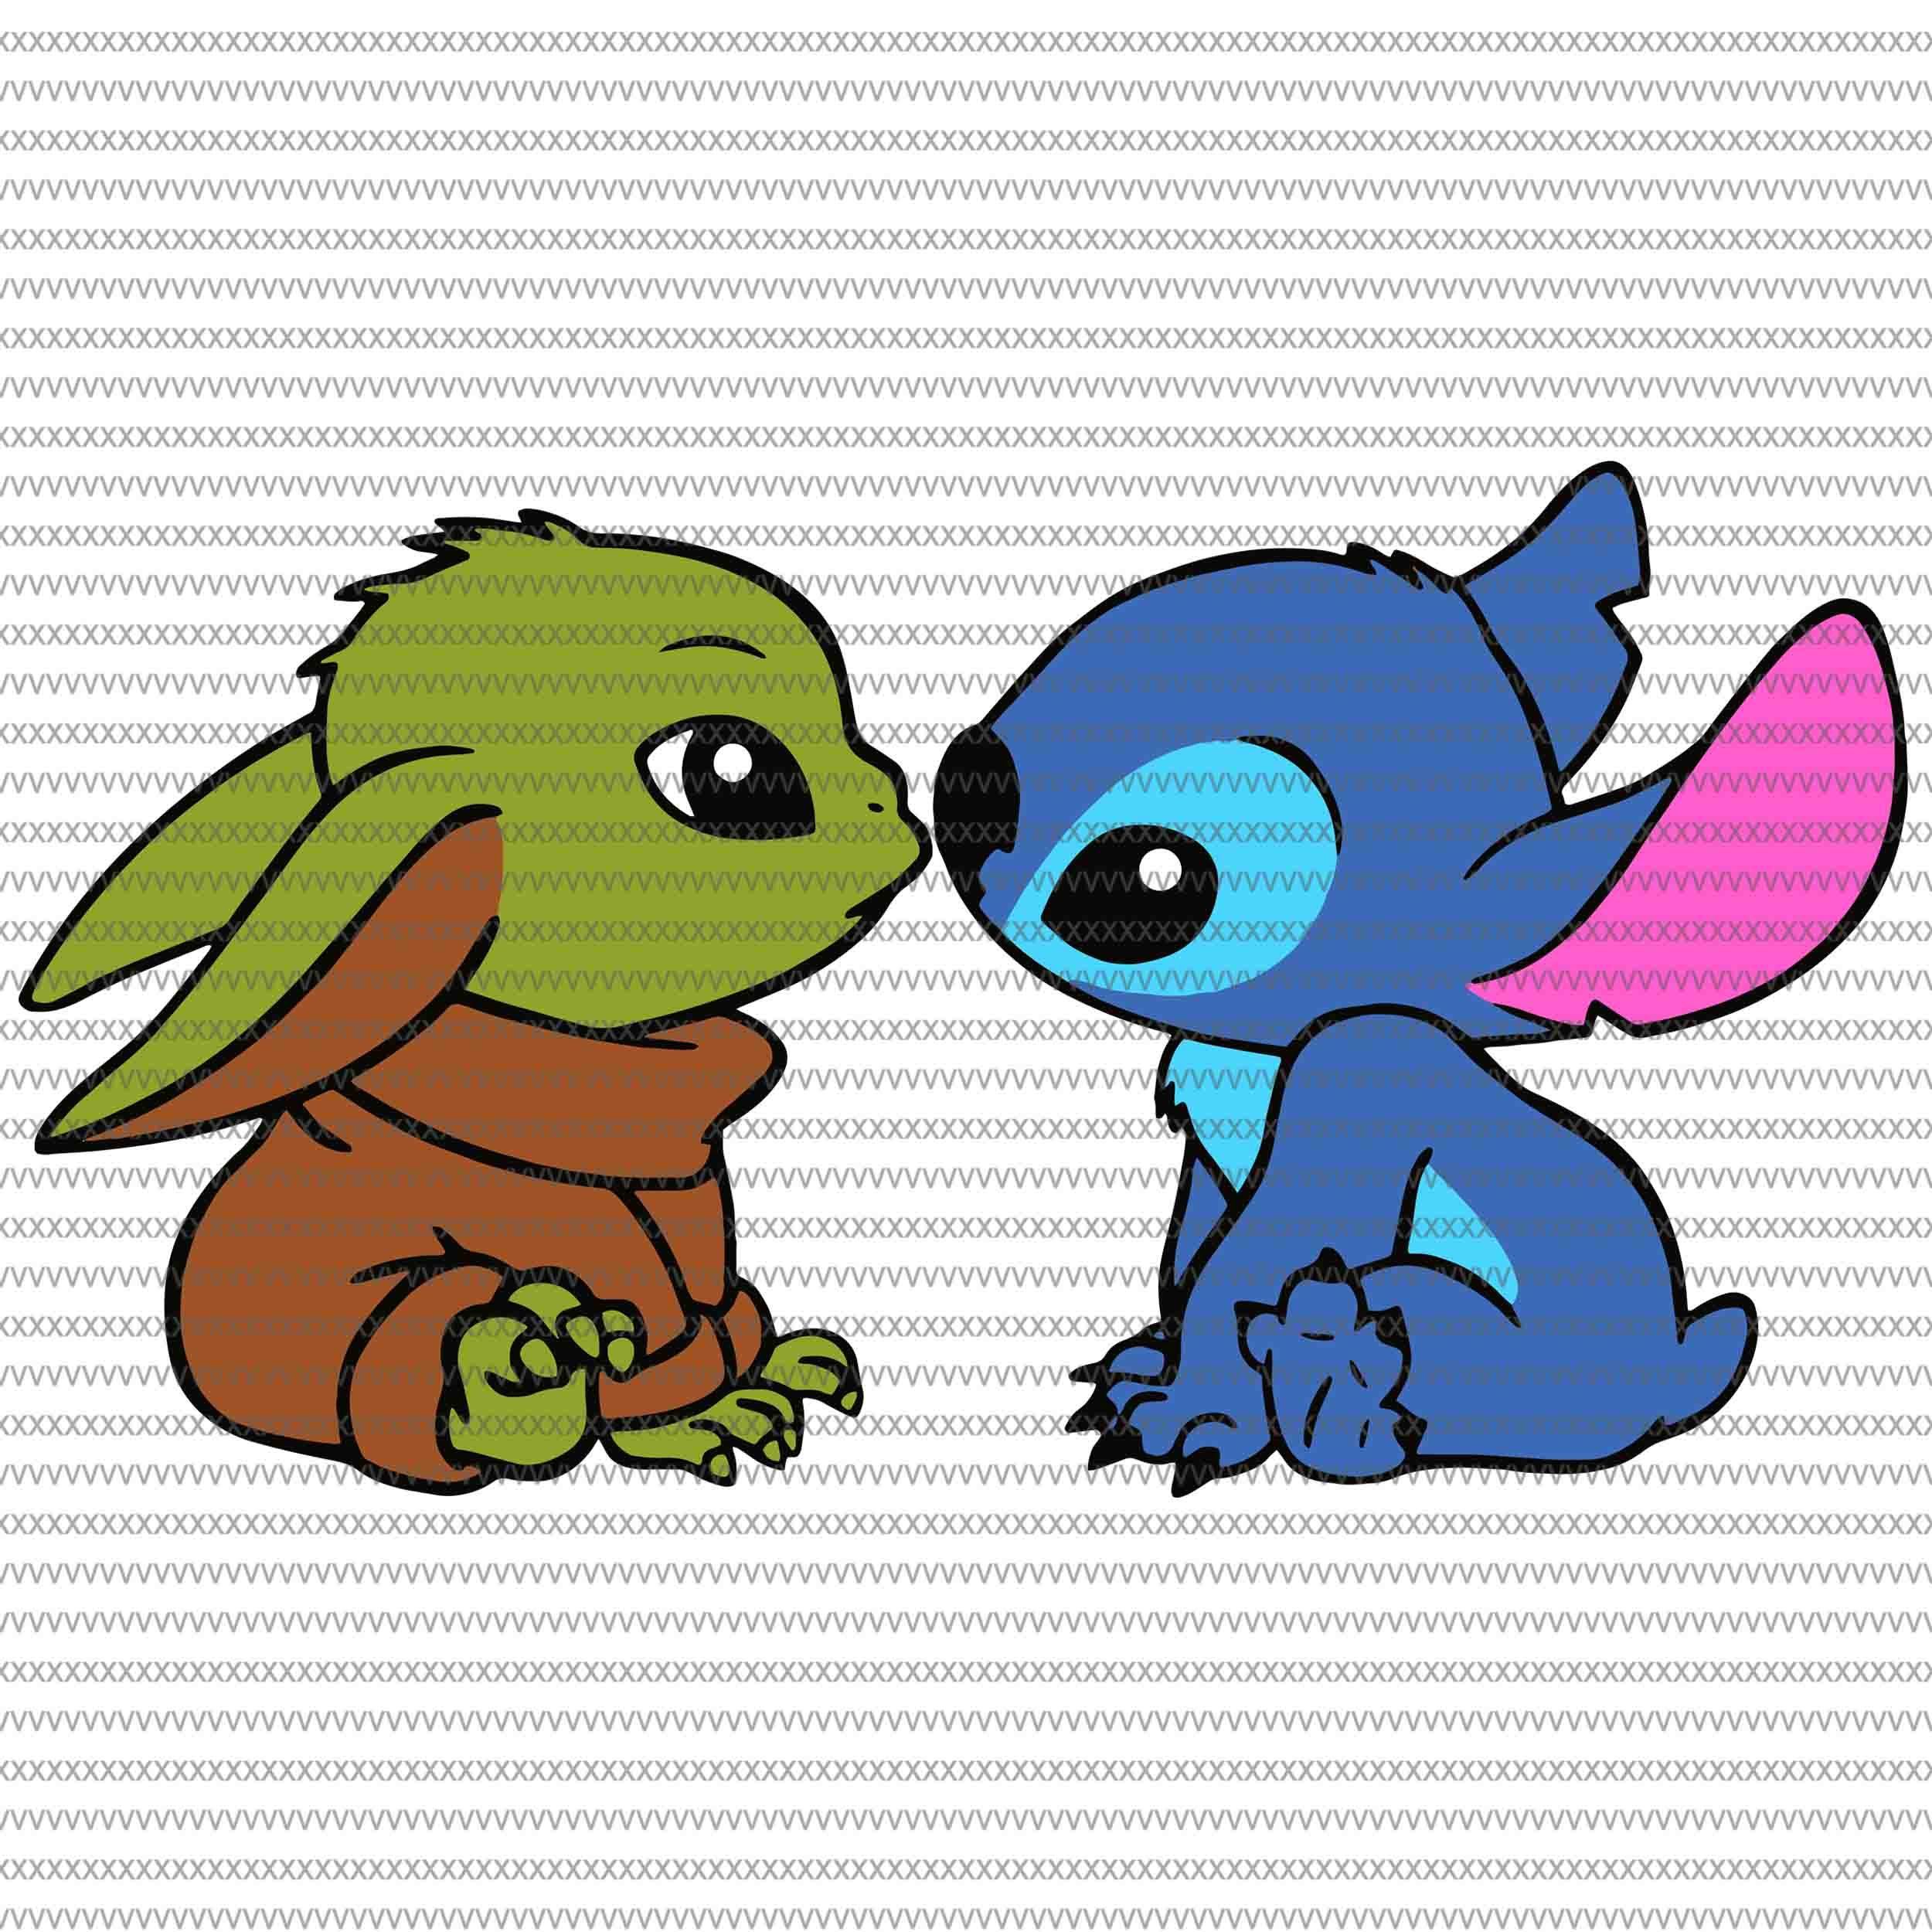 Pin on Stitch wallpapers